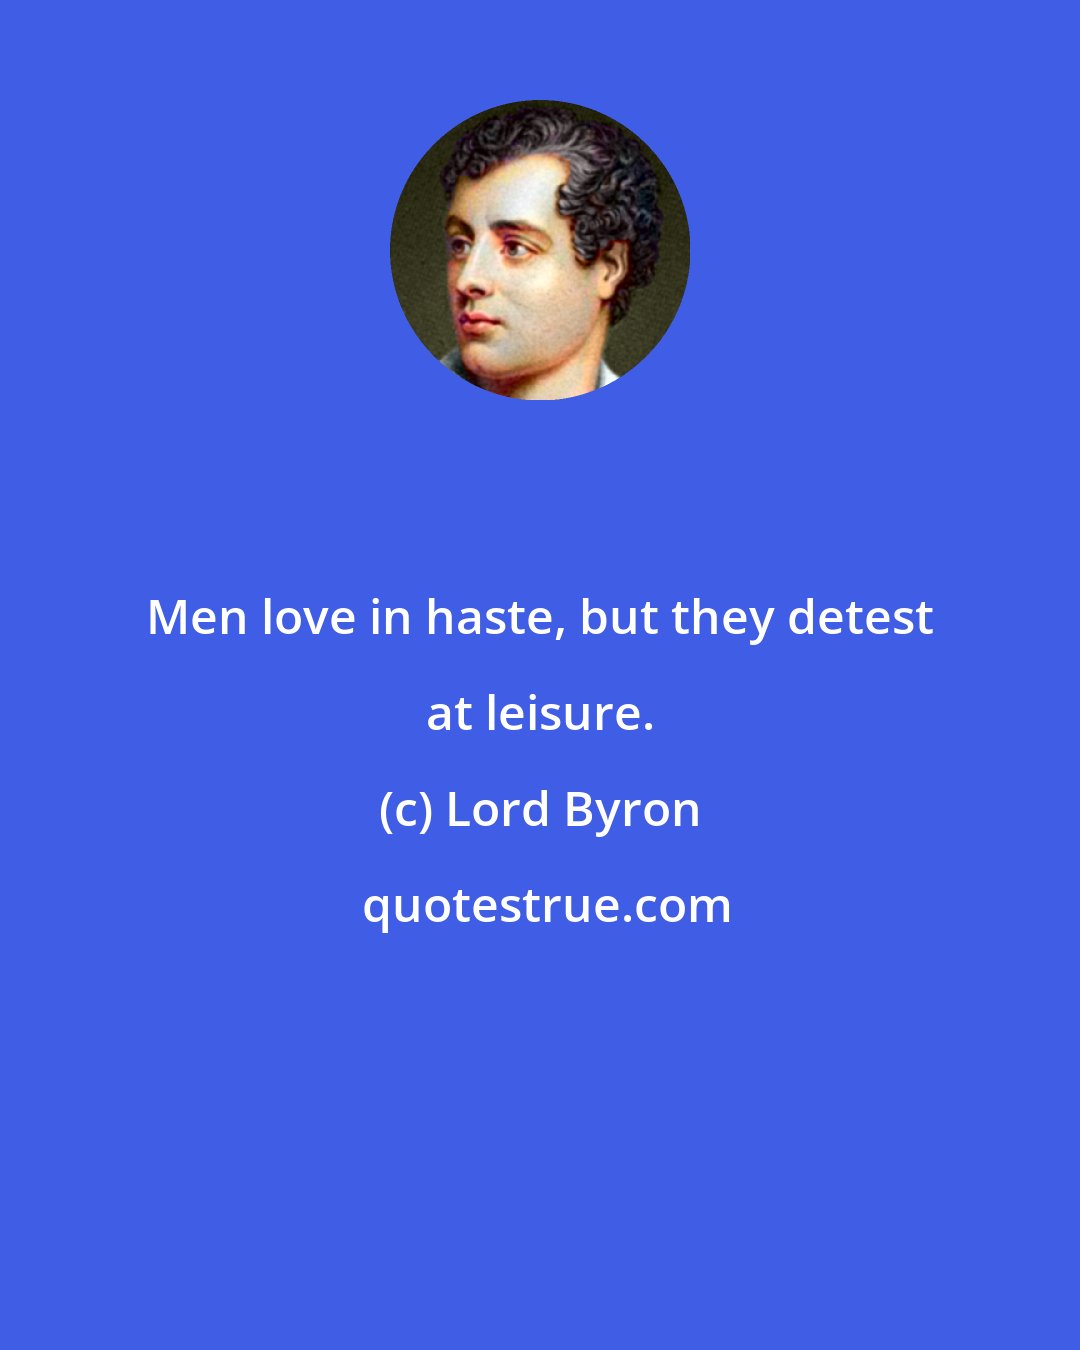 Lord Byron: Men love in haste, but they detest at leisure.